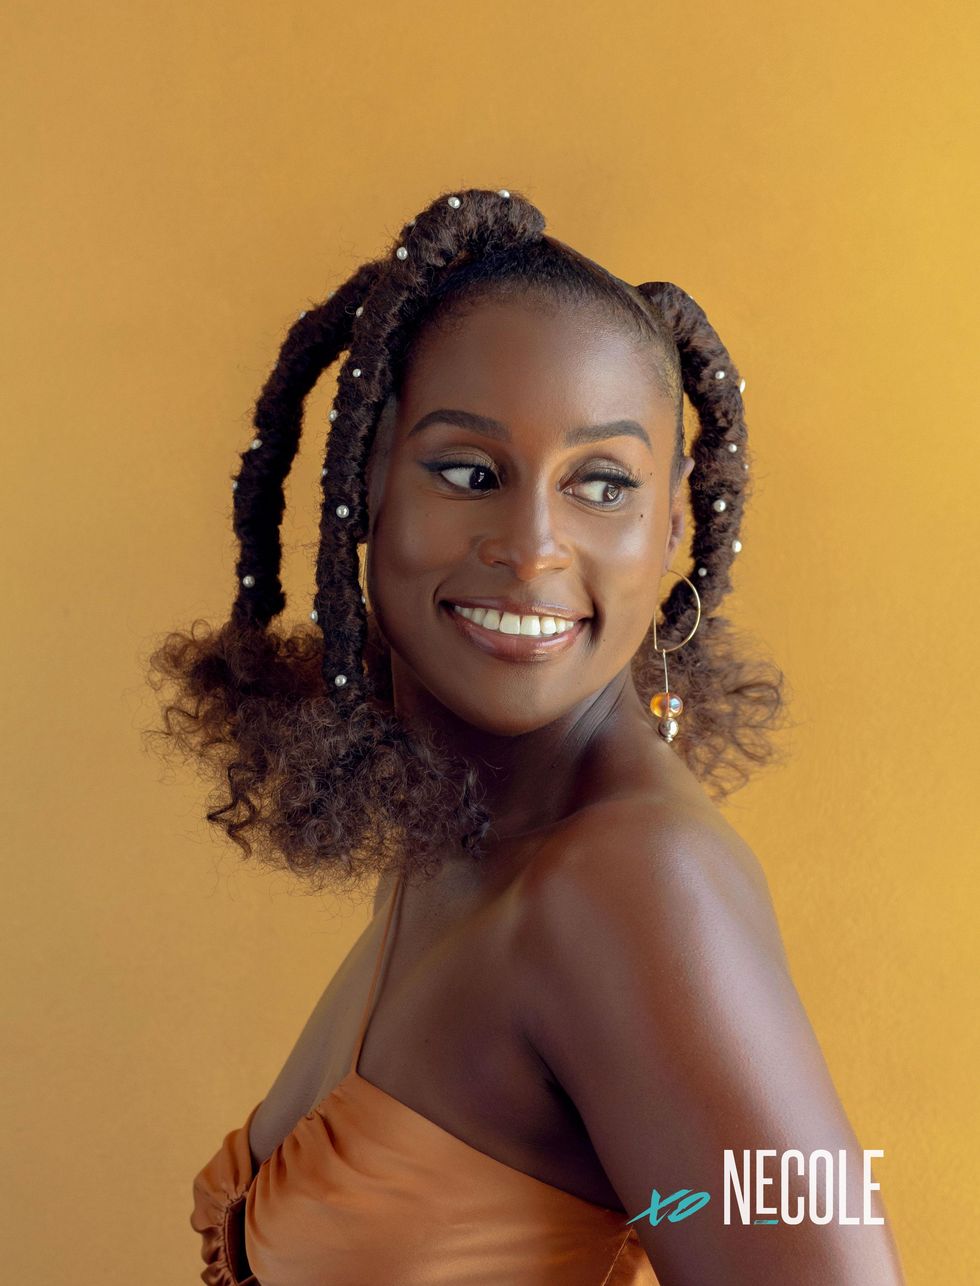 A Black woman, Issa Rae, stands to the side, looking off to the side over her shoulder and smiling. Her hair is in four unicorn ponytails with curly ends and each ponytail is studded with white pearls.